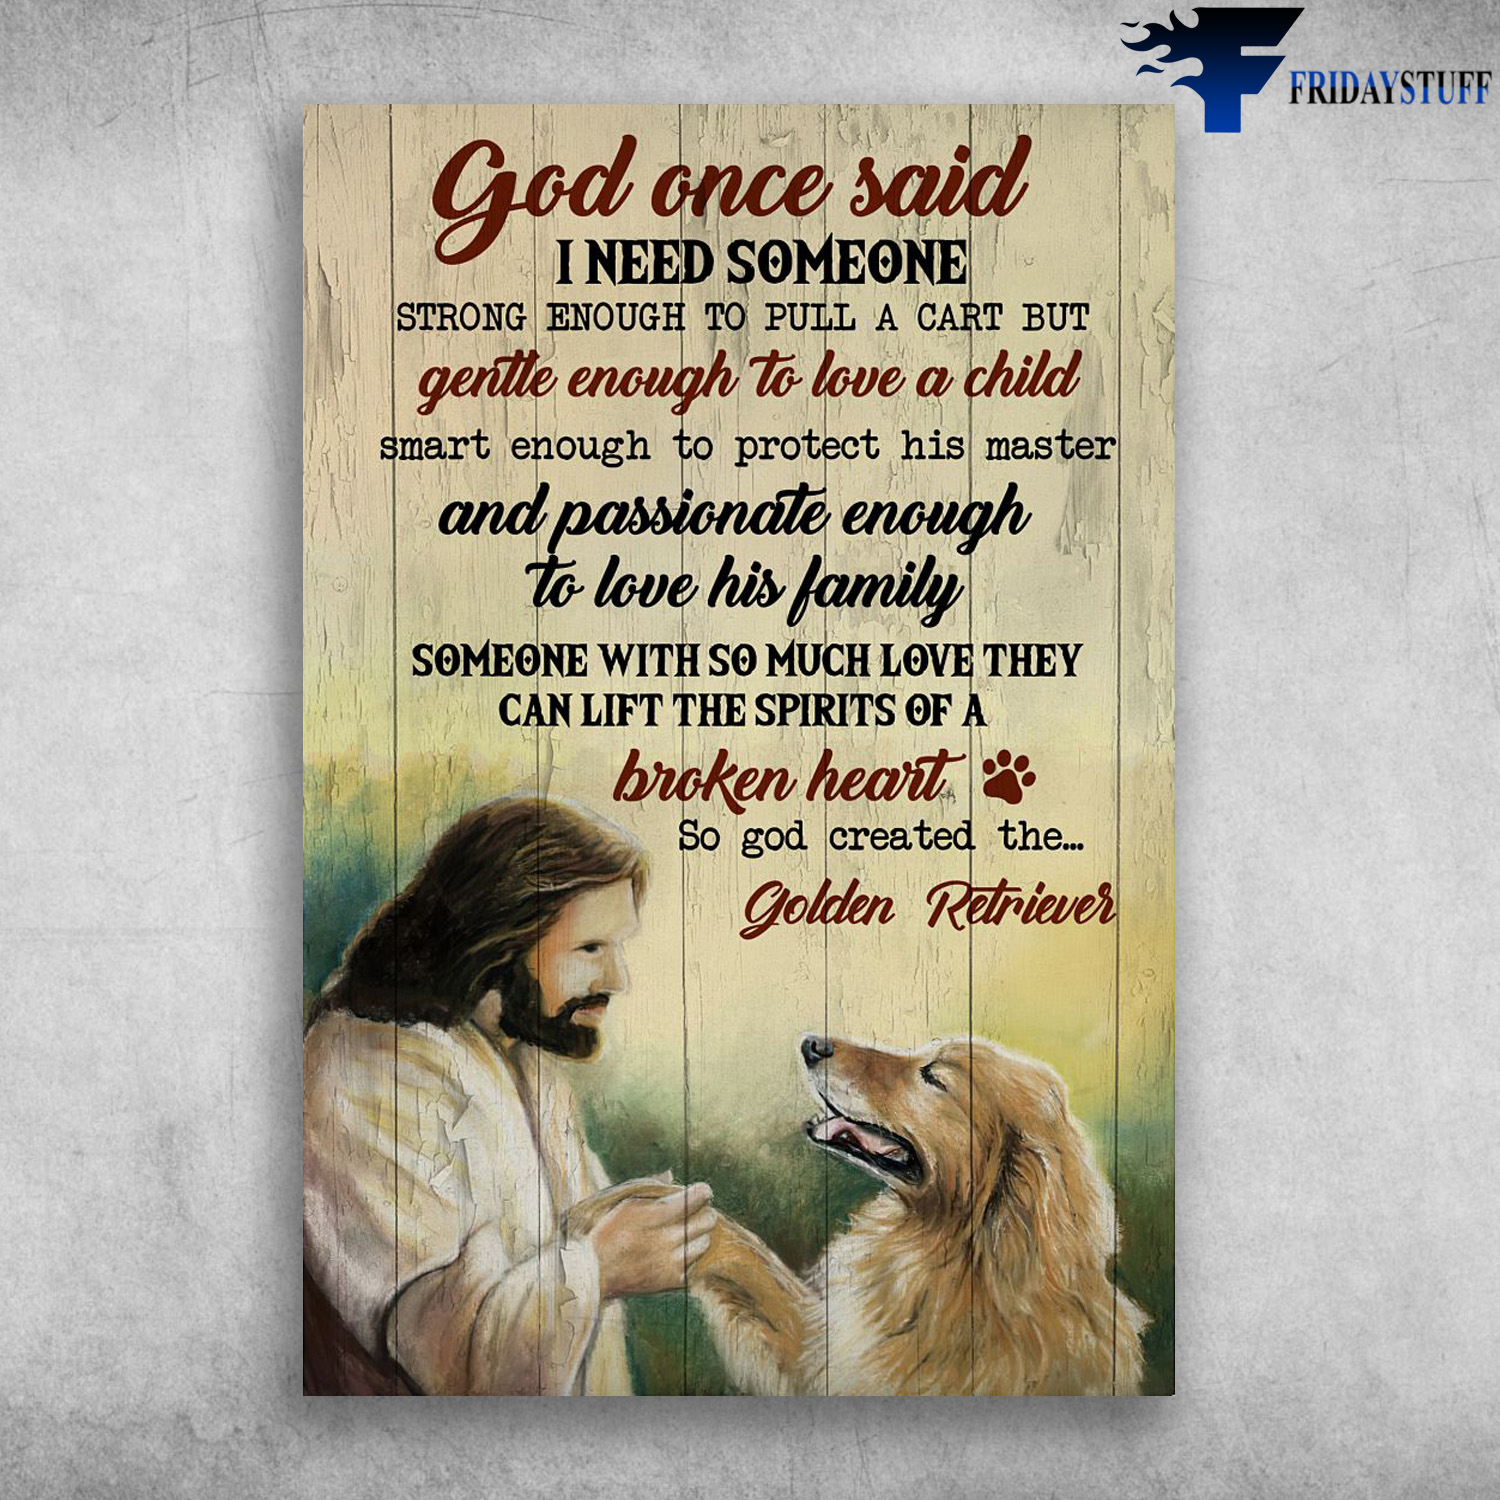 God And Golden Retriever - God Once Said, I Need Some, Strong Enough To Pull A Cart But, Genttle Enough To Love A Child, Smart Enough To Protect His Master